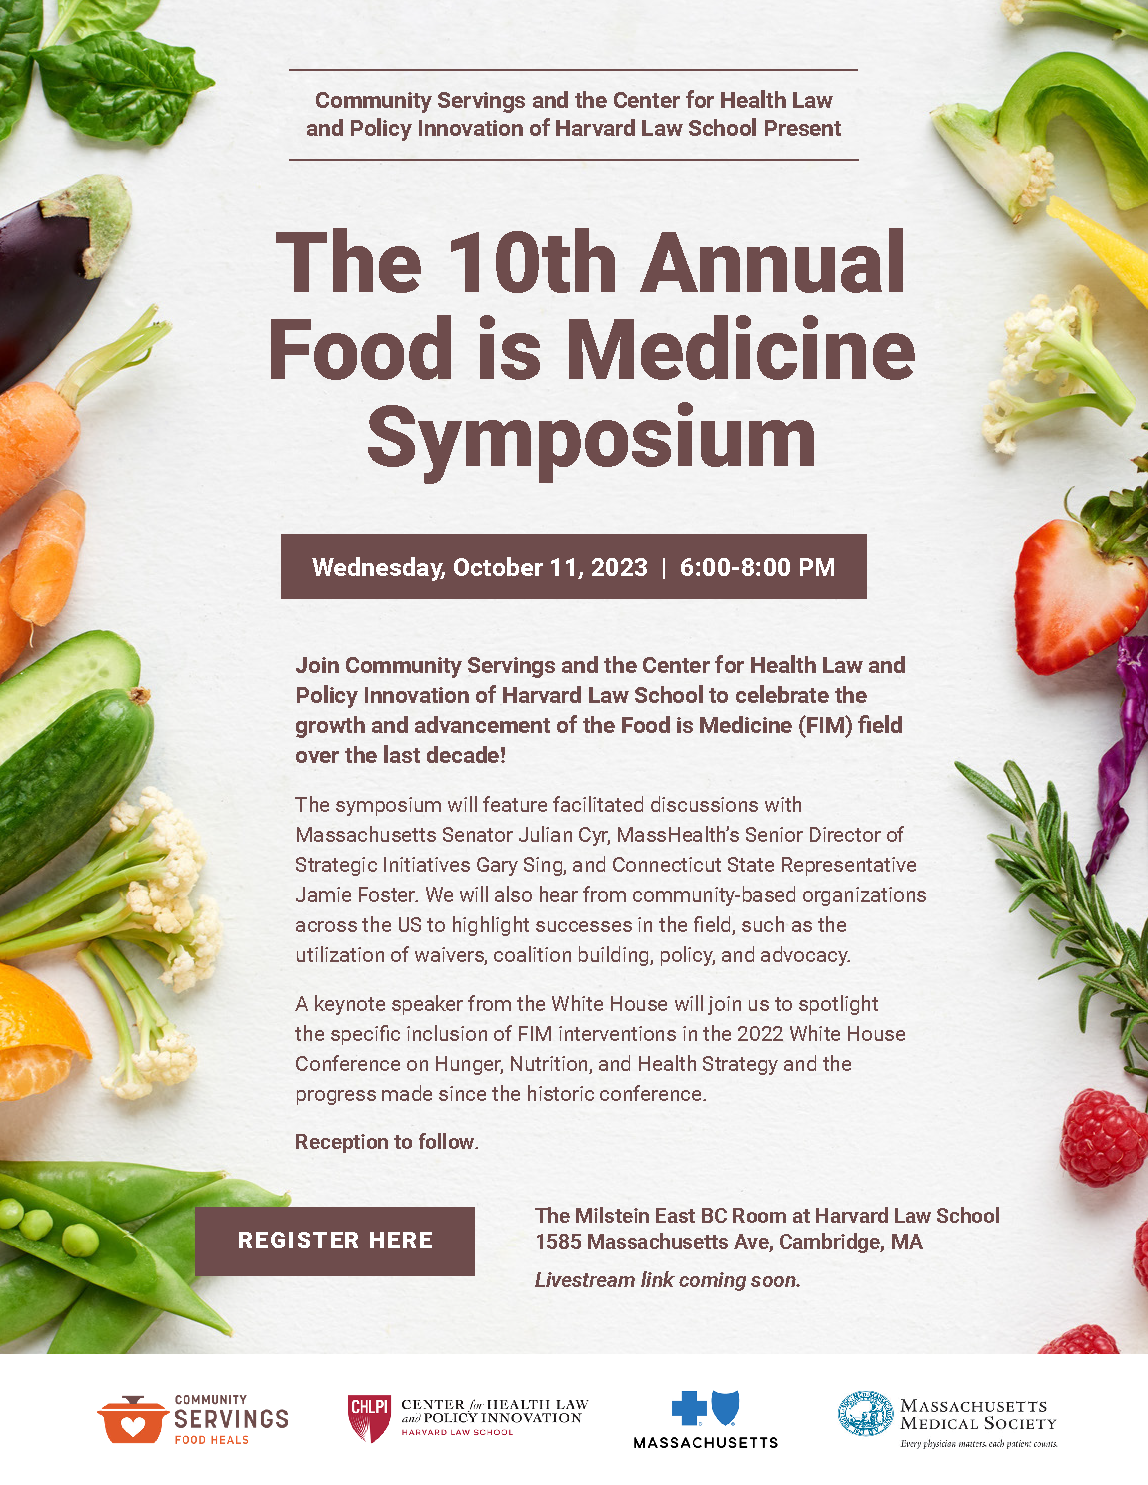 Poster for the 10th Annual Food is Medicine Symposium